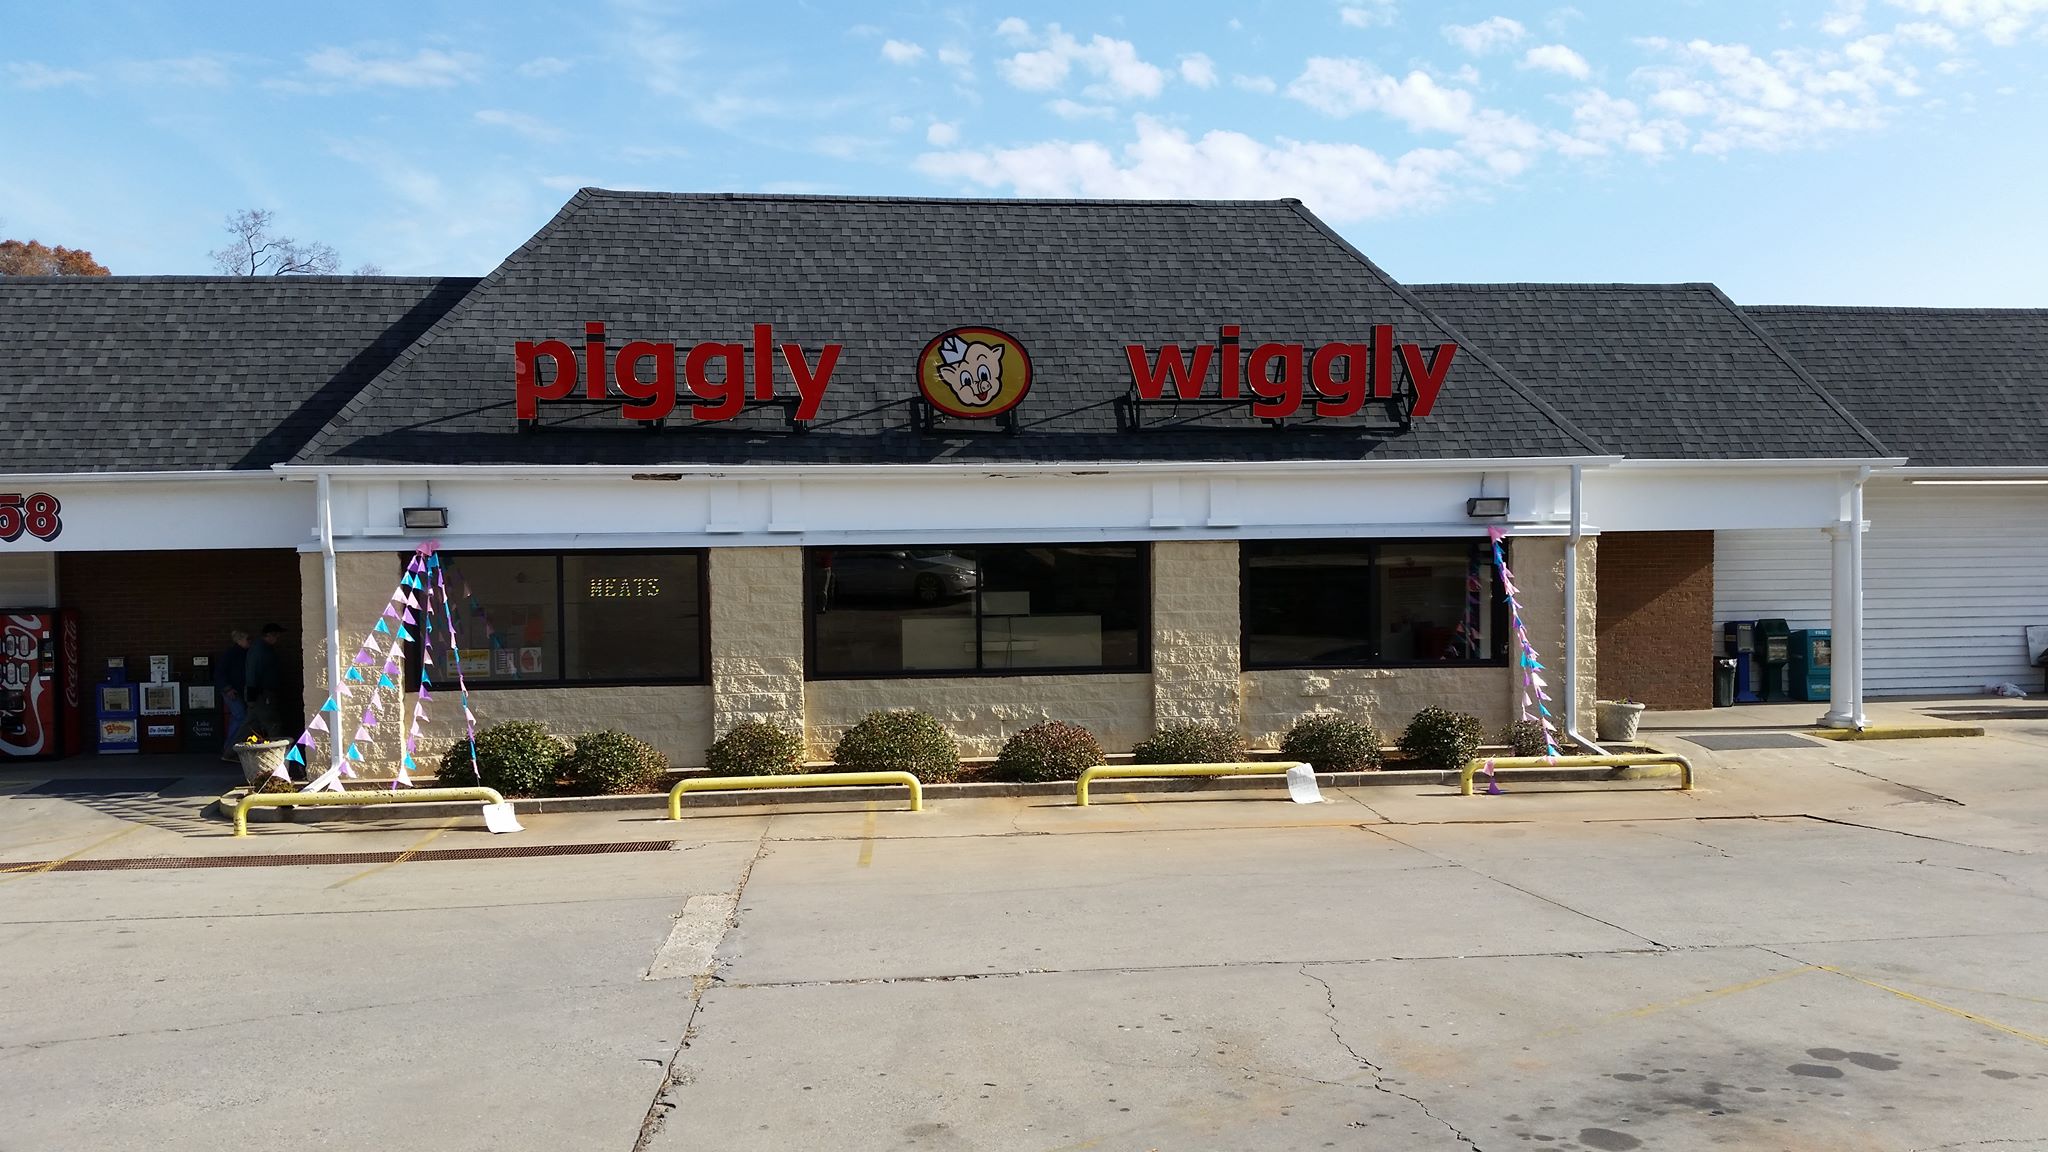 Piggly Wiggly...